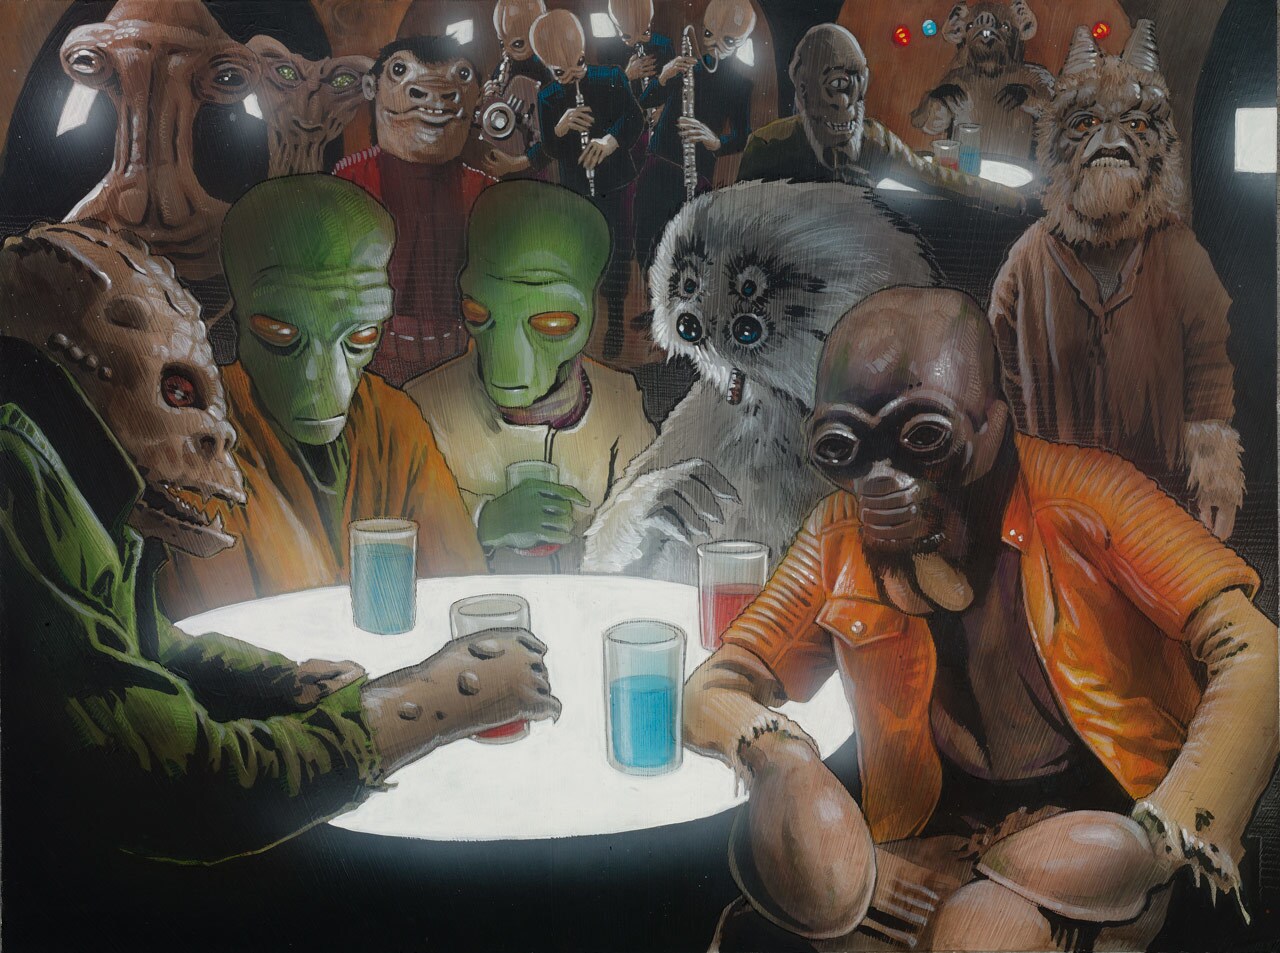 An artist's rendition of the many aliens of the the Mos Eisley Cantina gathered together.